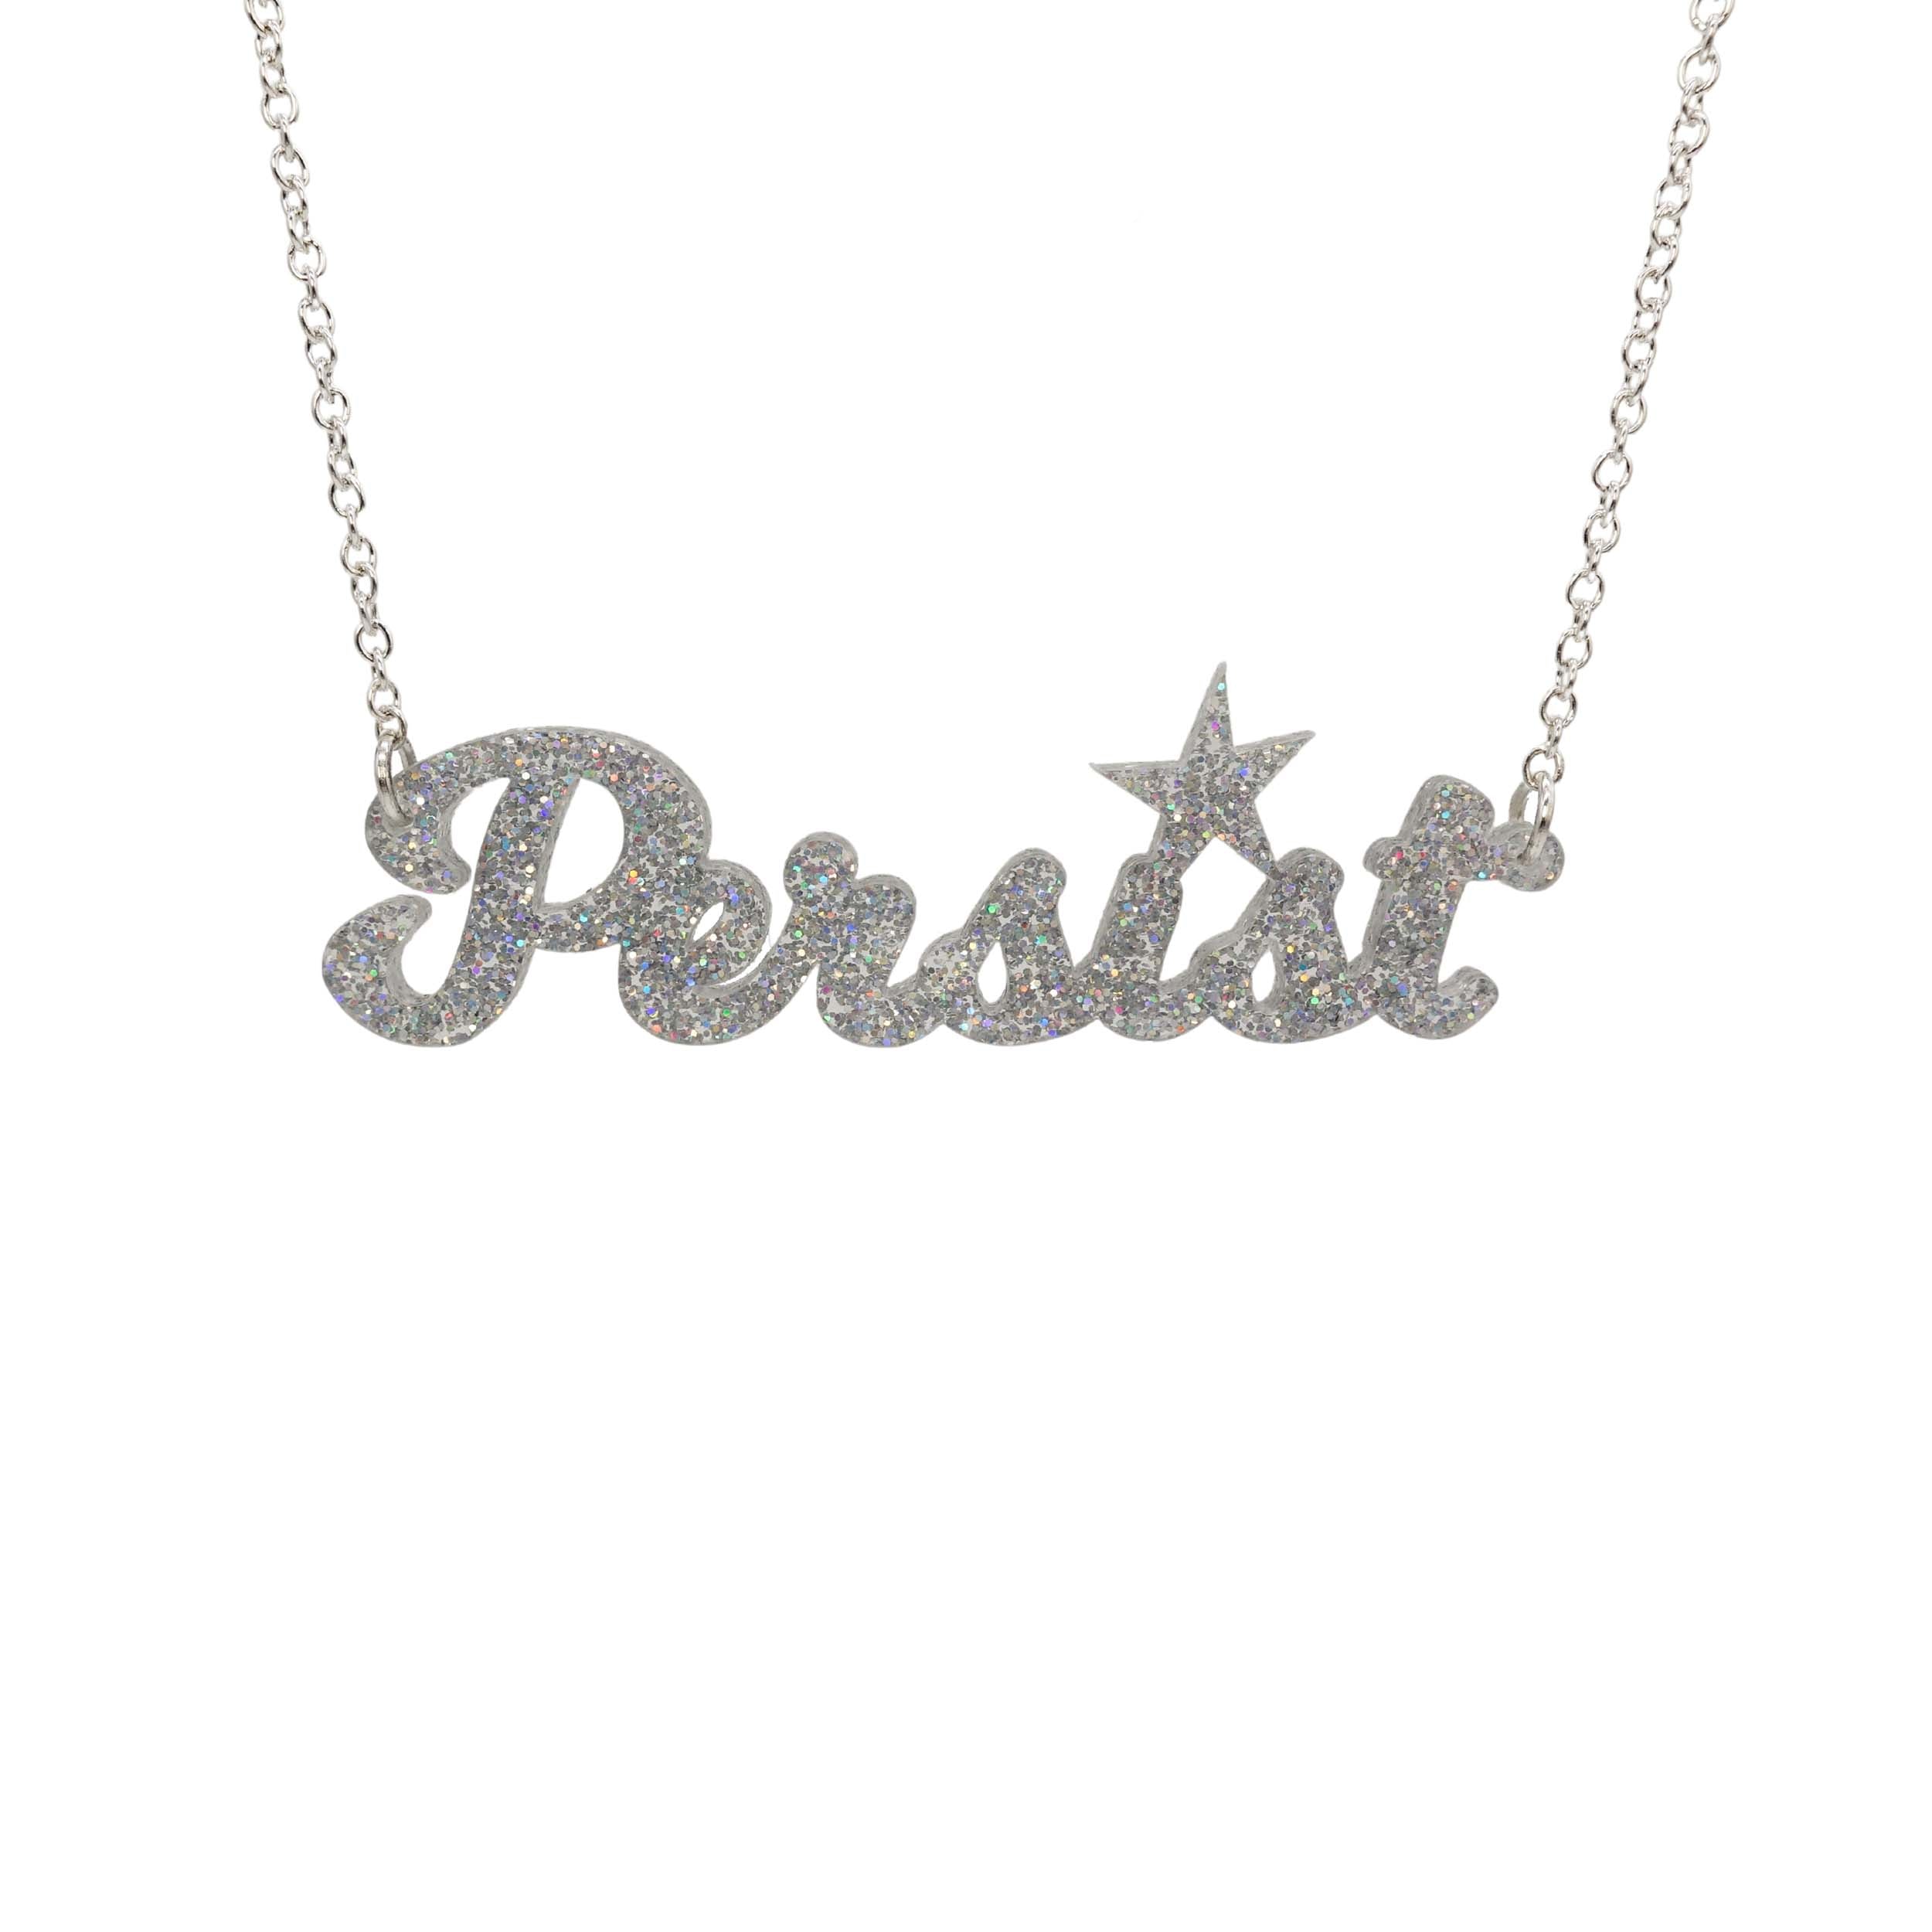 Silver glitter script Persist necklace shown hanging against a white background. 